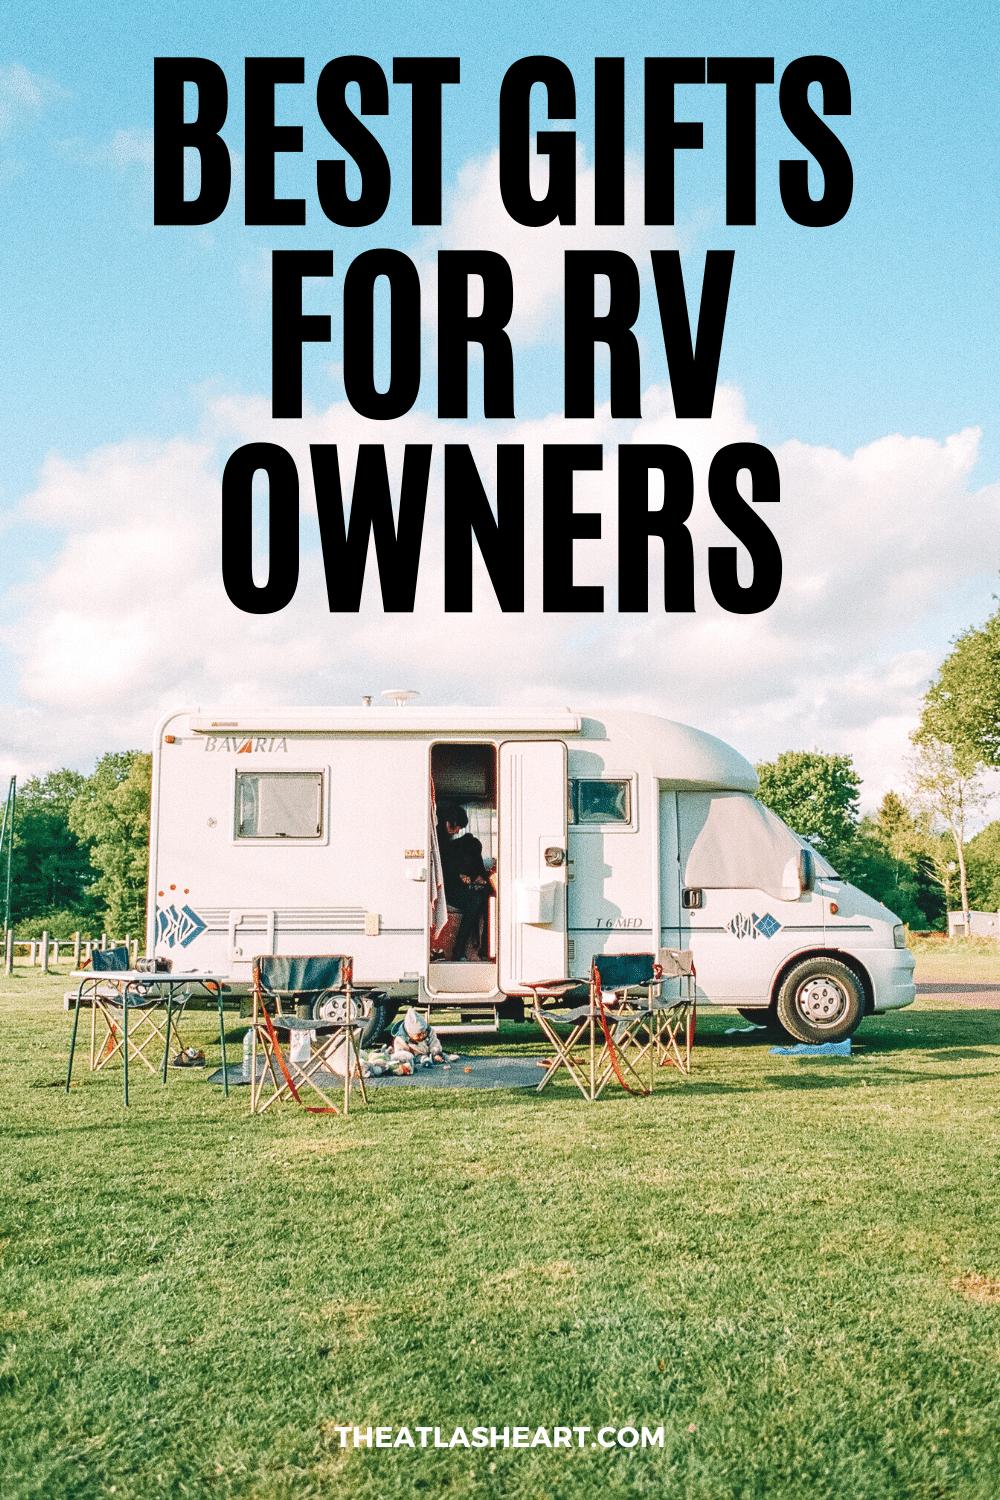 51 Best Gifts for RV Owners (That They’ll Actually Use)